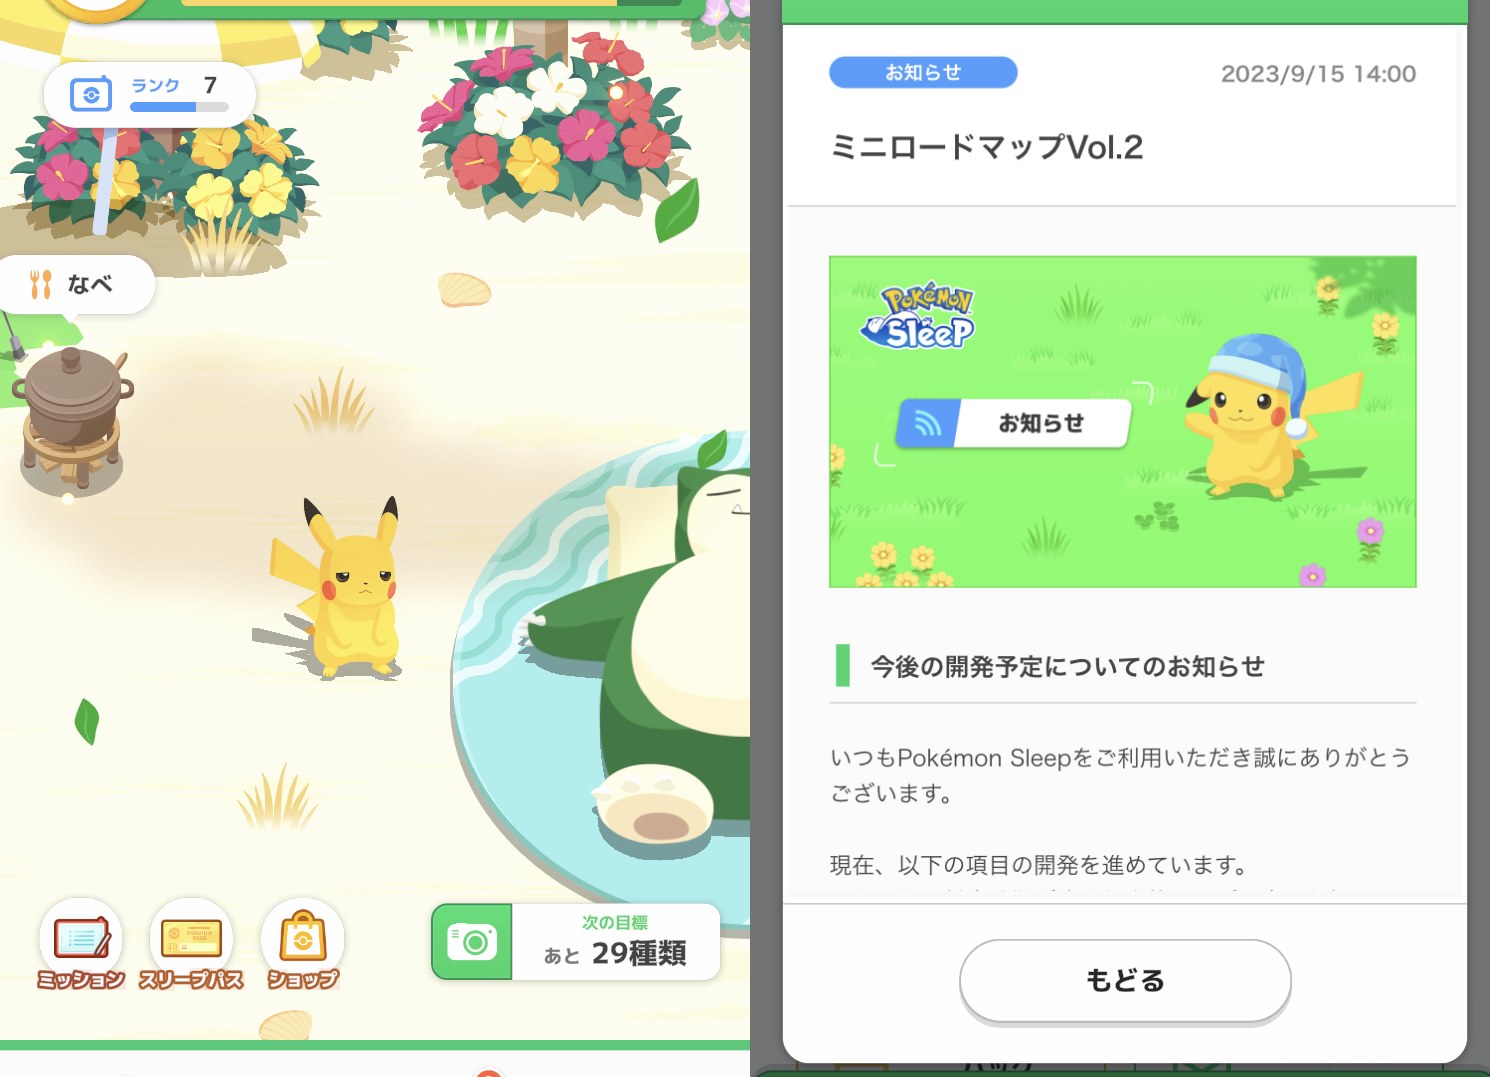 Pokémon Sleep to tackle issue of Helper Pokémon always being tired and sad with upcoming updates 